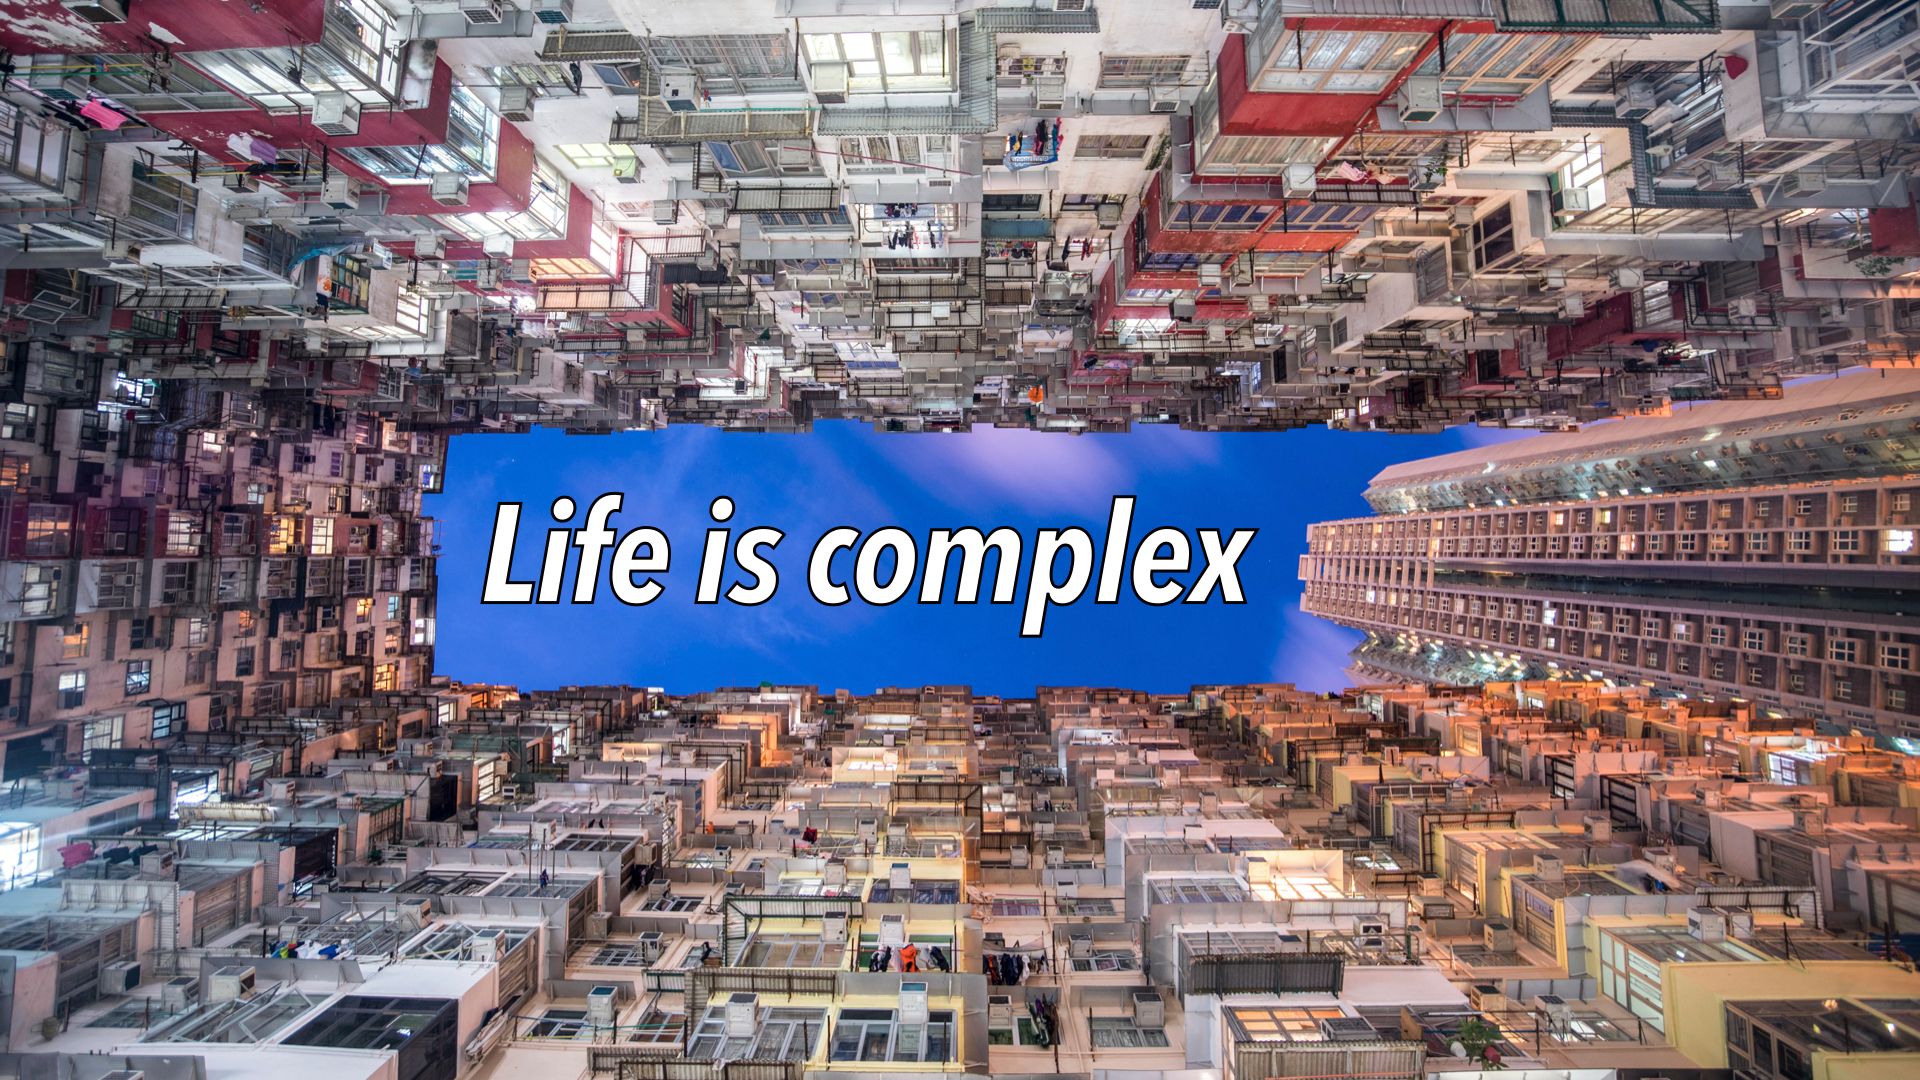 Slide text "Life is complex" overlaid on blue sky surrounded by high-rise apartment blocks